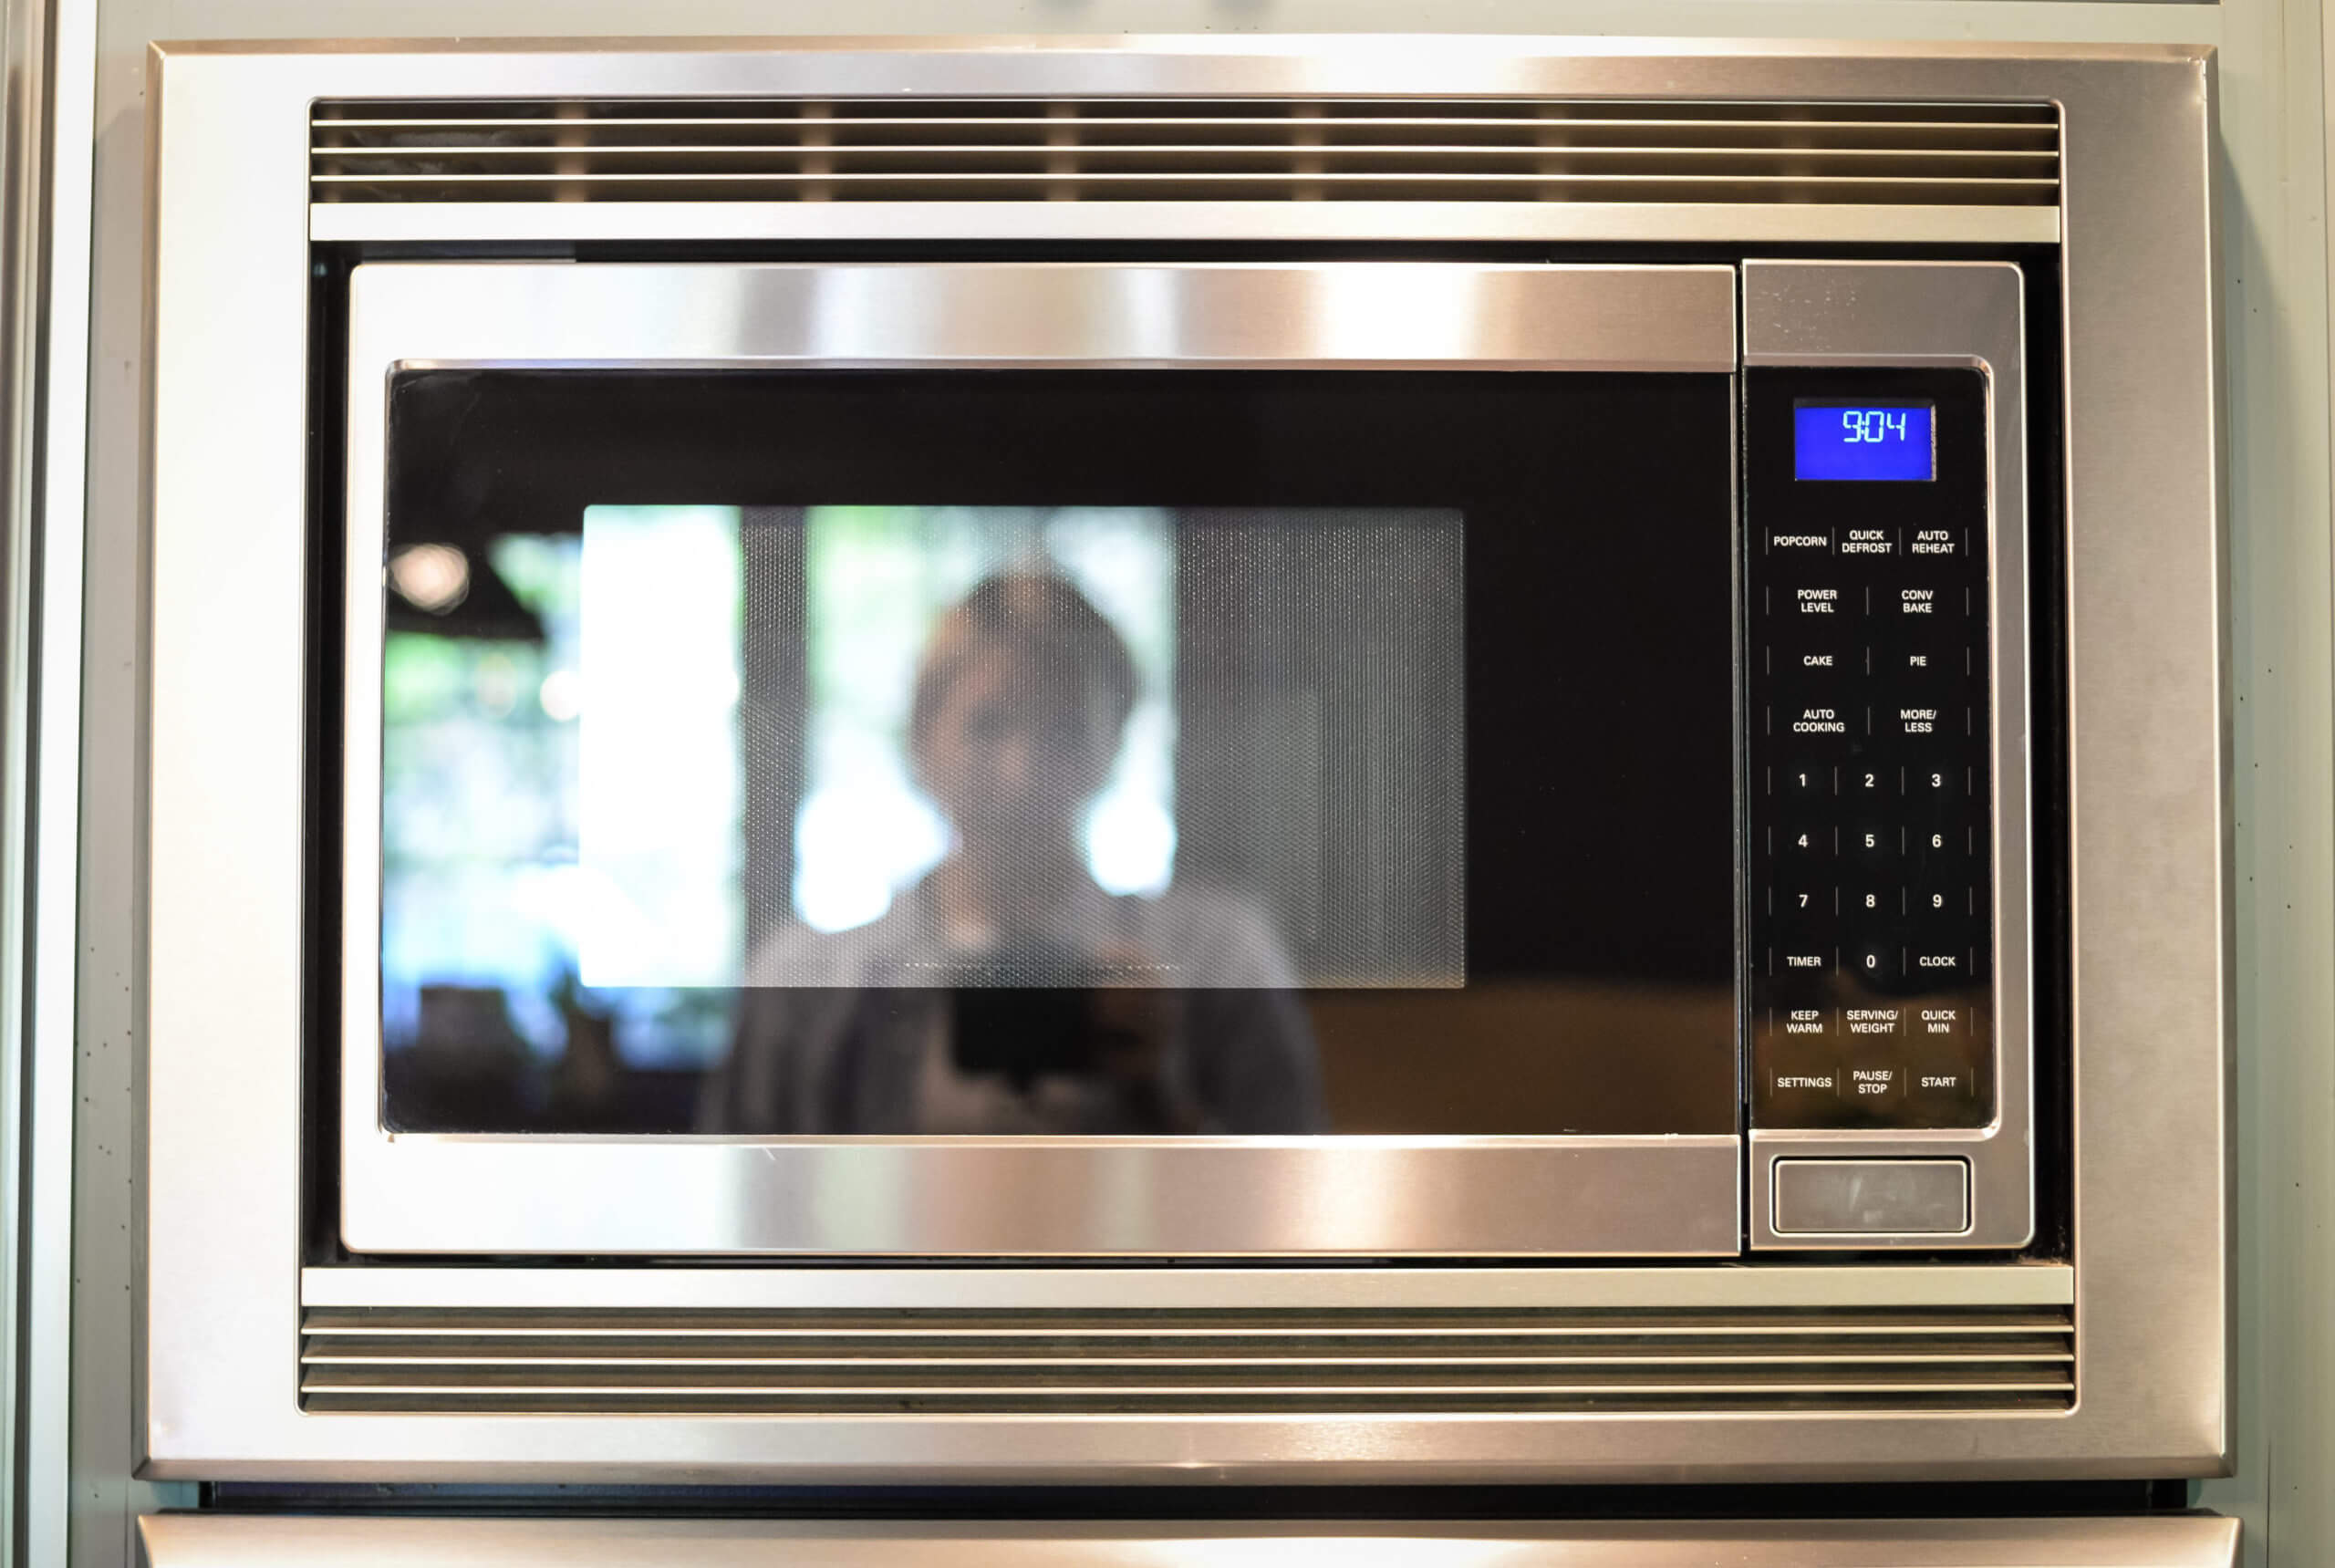 A stainless steel microwave . The reflection of the photographer is shown in the glass of the microwave.